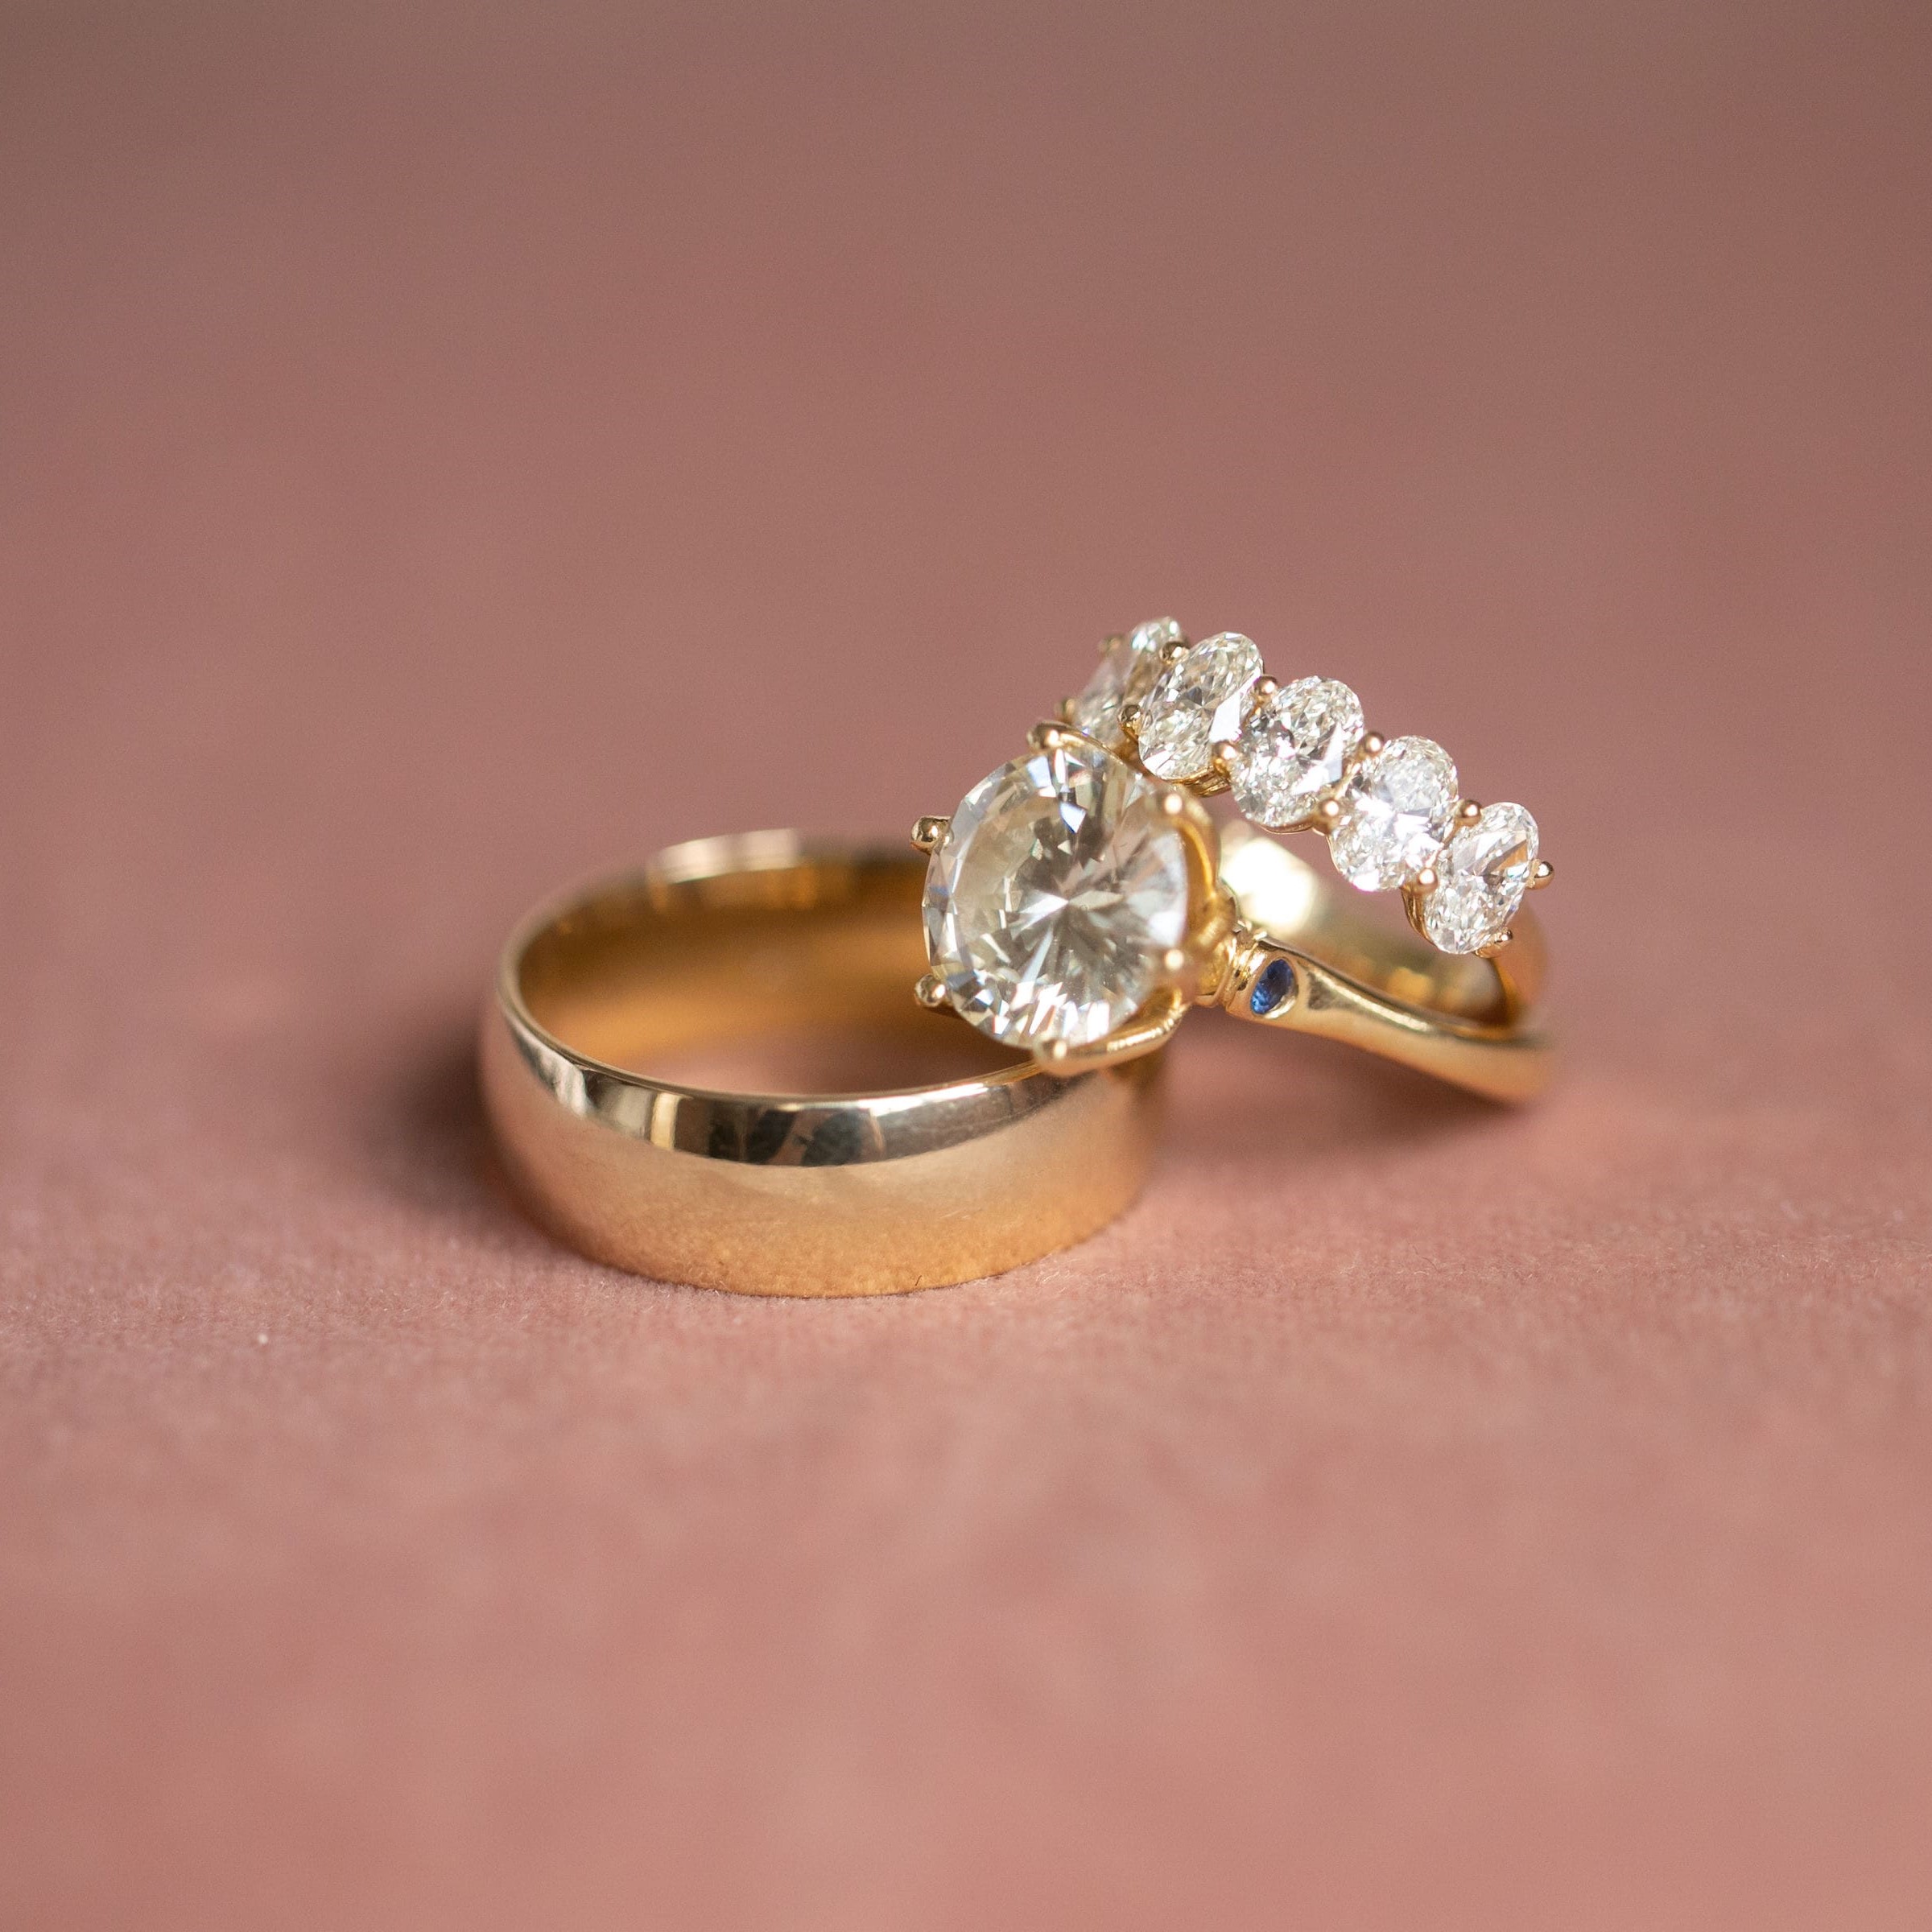 Gold wedding rings stacked atop a pink backdrop